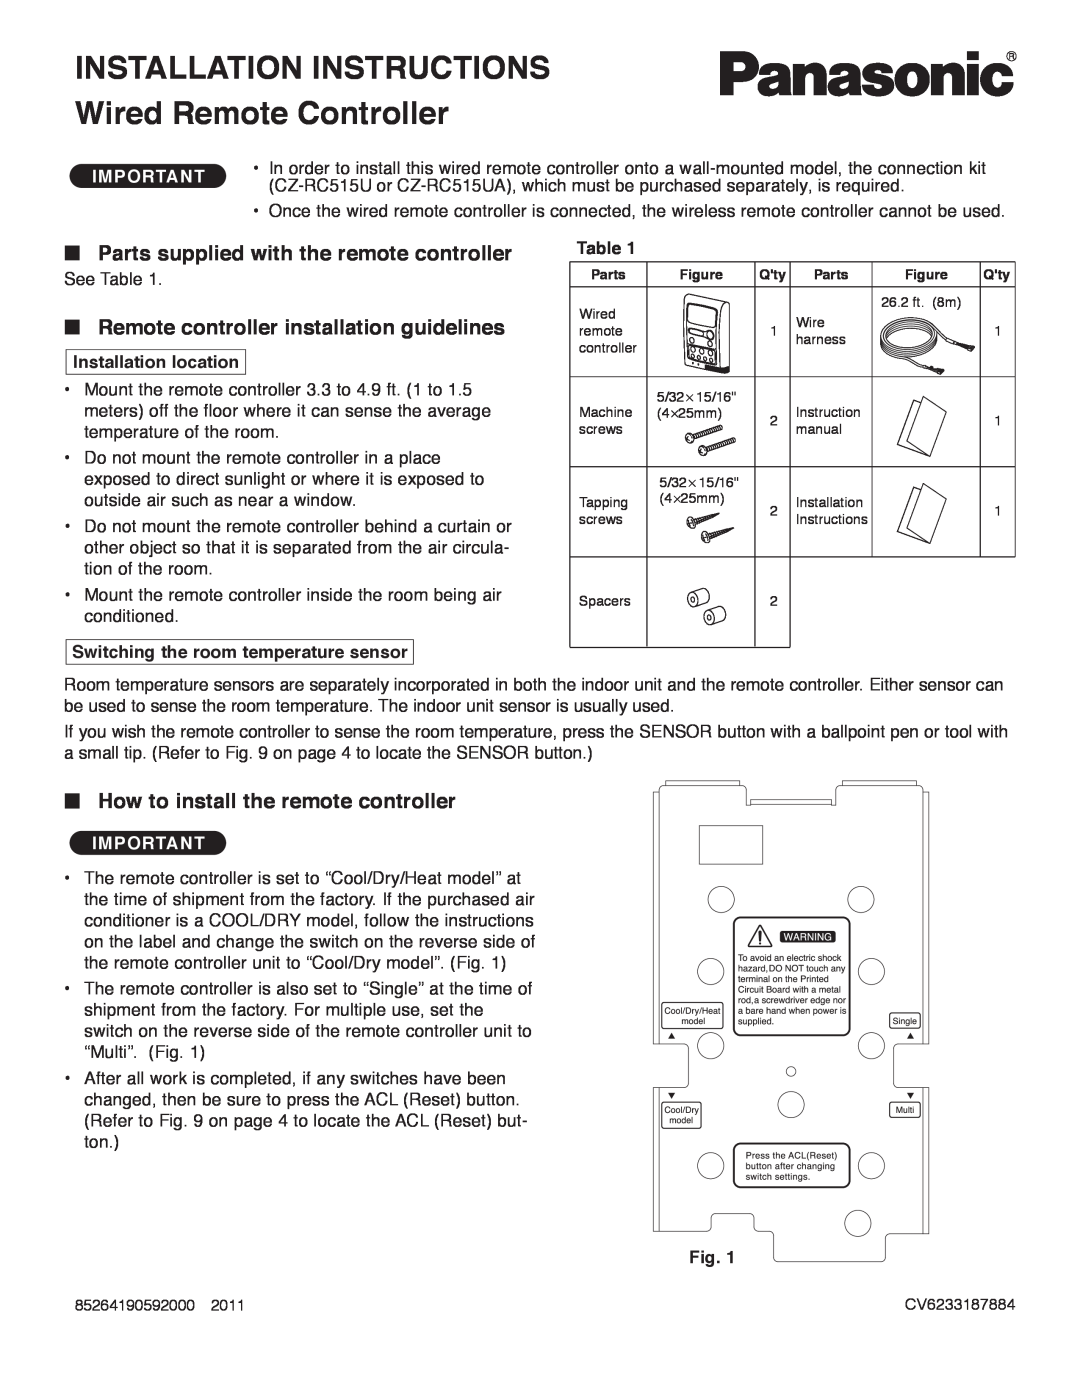 Panasonic CZ-RD515U INSTALLATION INSTRUCTIONS Wired Remote Controller, Parts supplied with the remote controller 